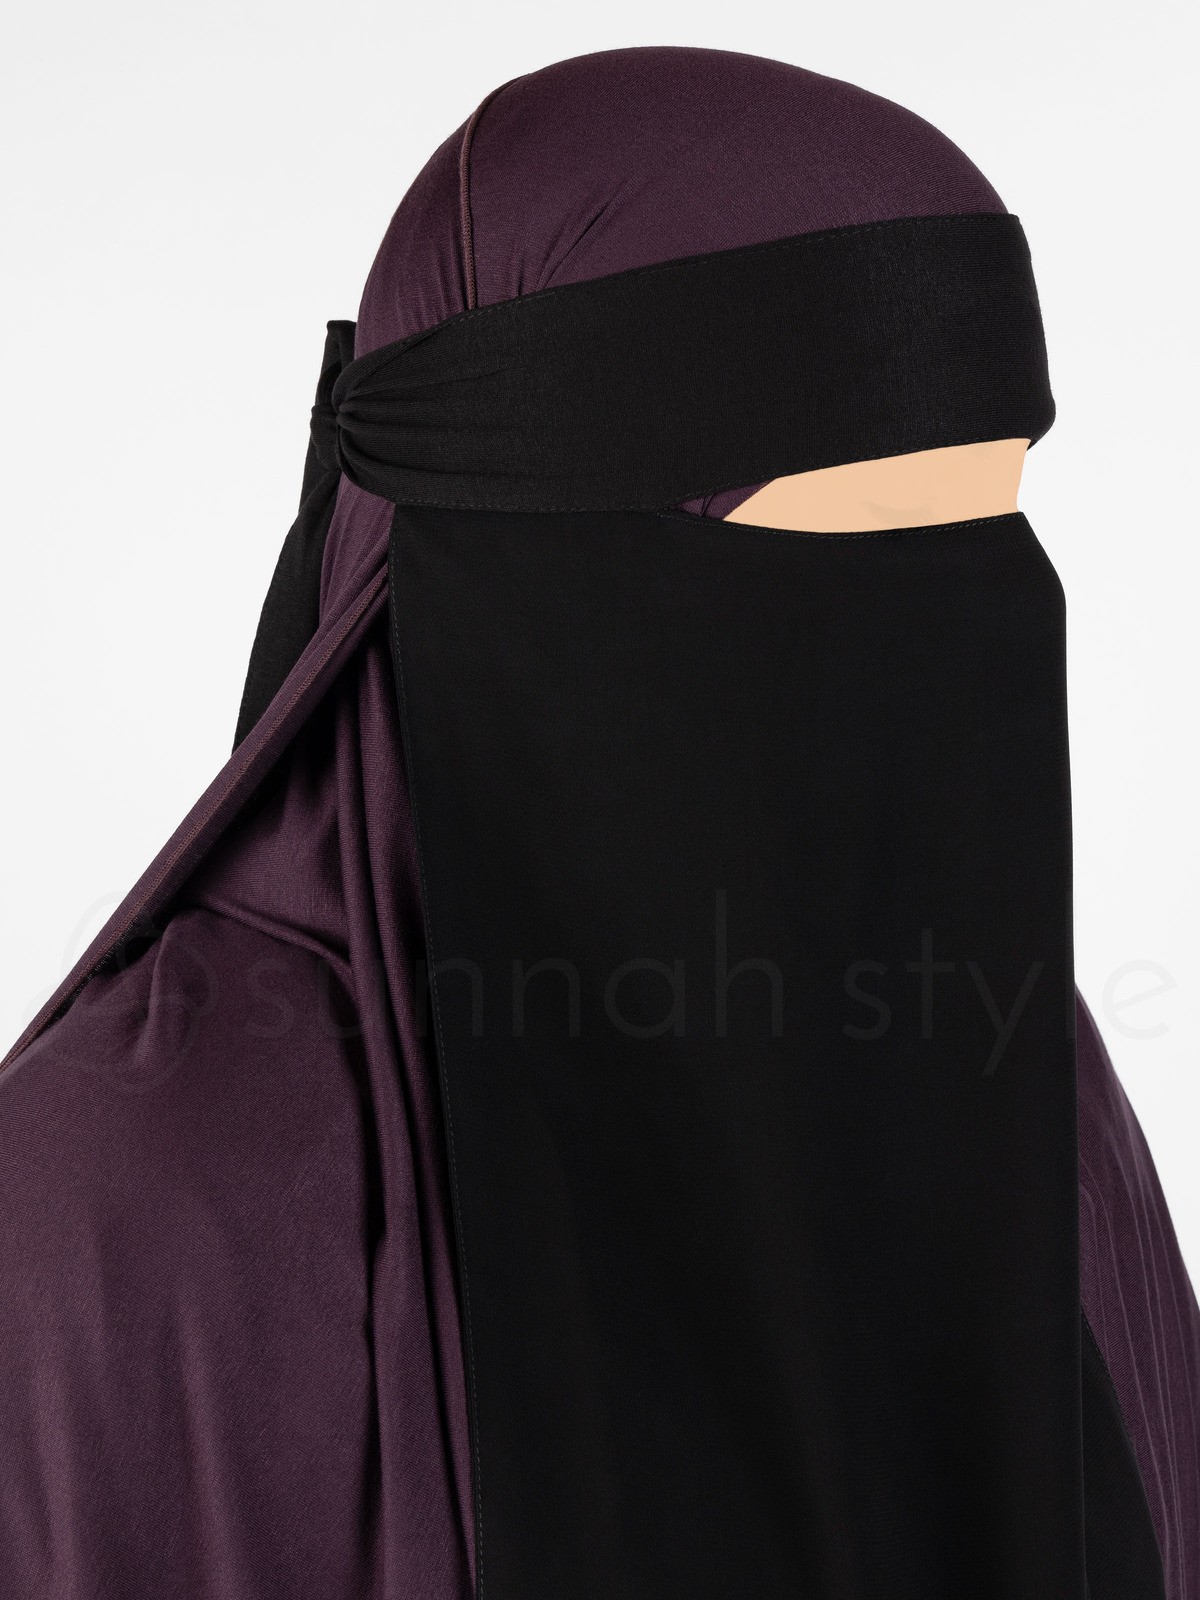 Sunnah Style - One Layer Soft Fit Niqab (Black)